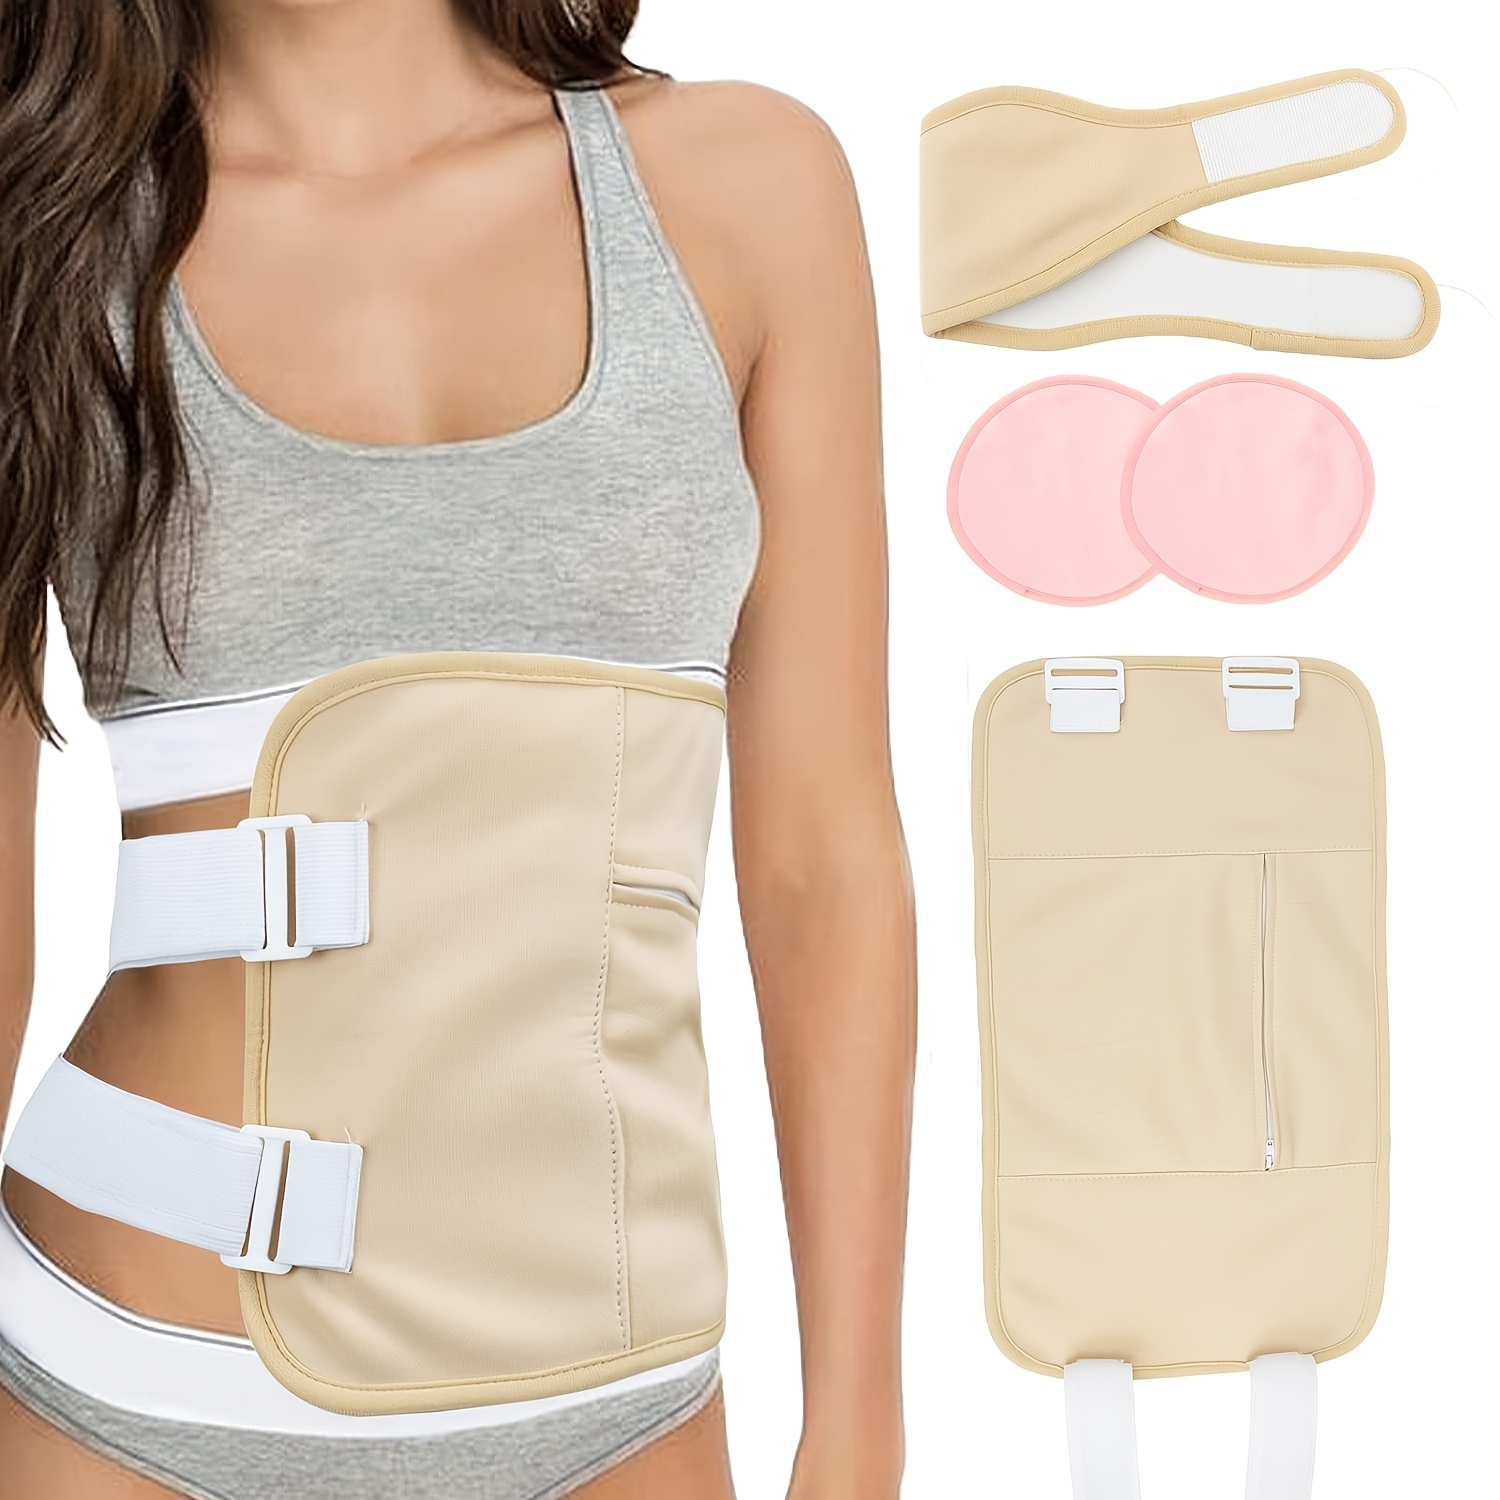  Postpartum Belly Band,C Section Belly Binder Wrap,Abdominal  Binder Post Surgery Girdle,Tummy Tuck Postpartum Essentials Waist Trainer  Nude : Clothing, Shoes & Jewelry